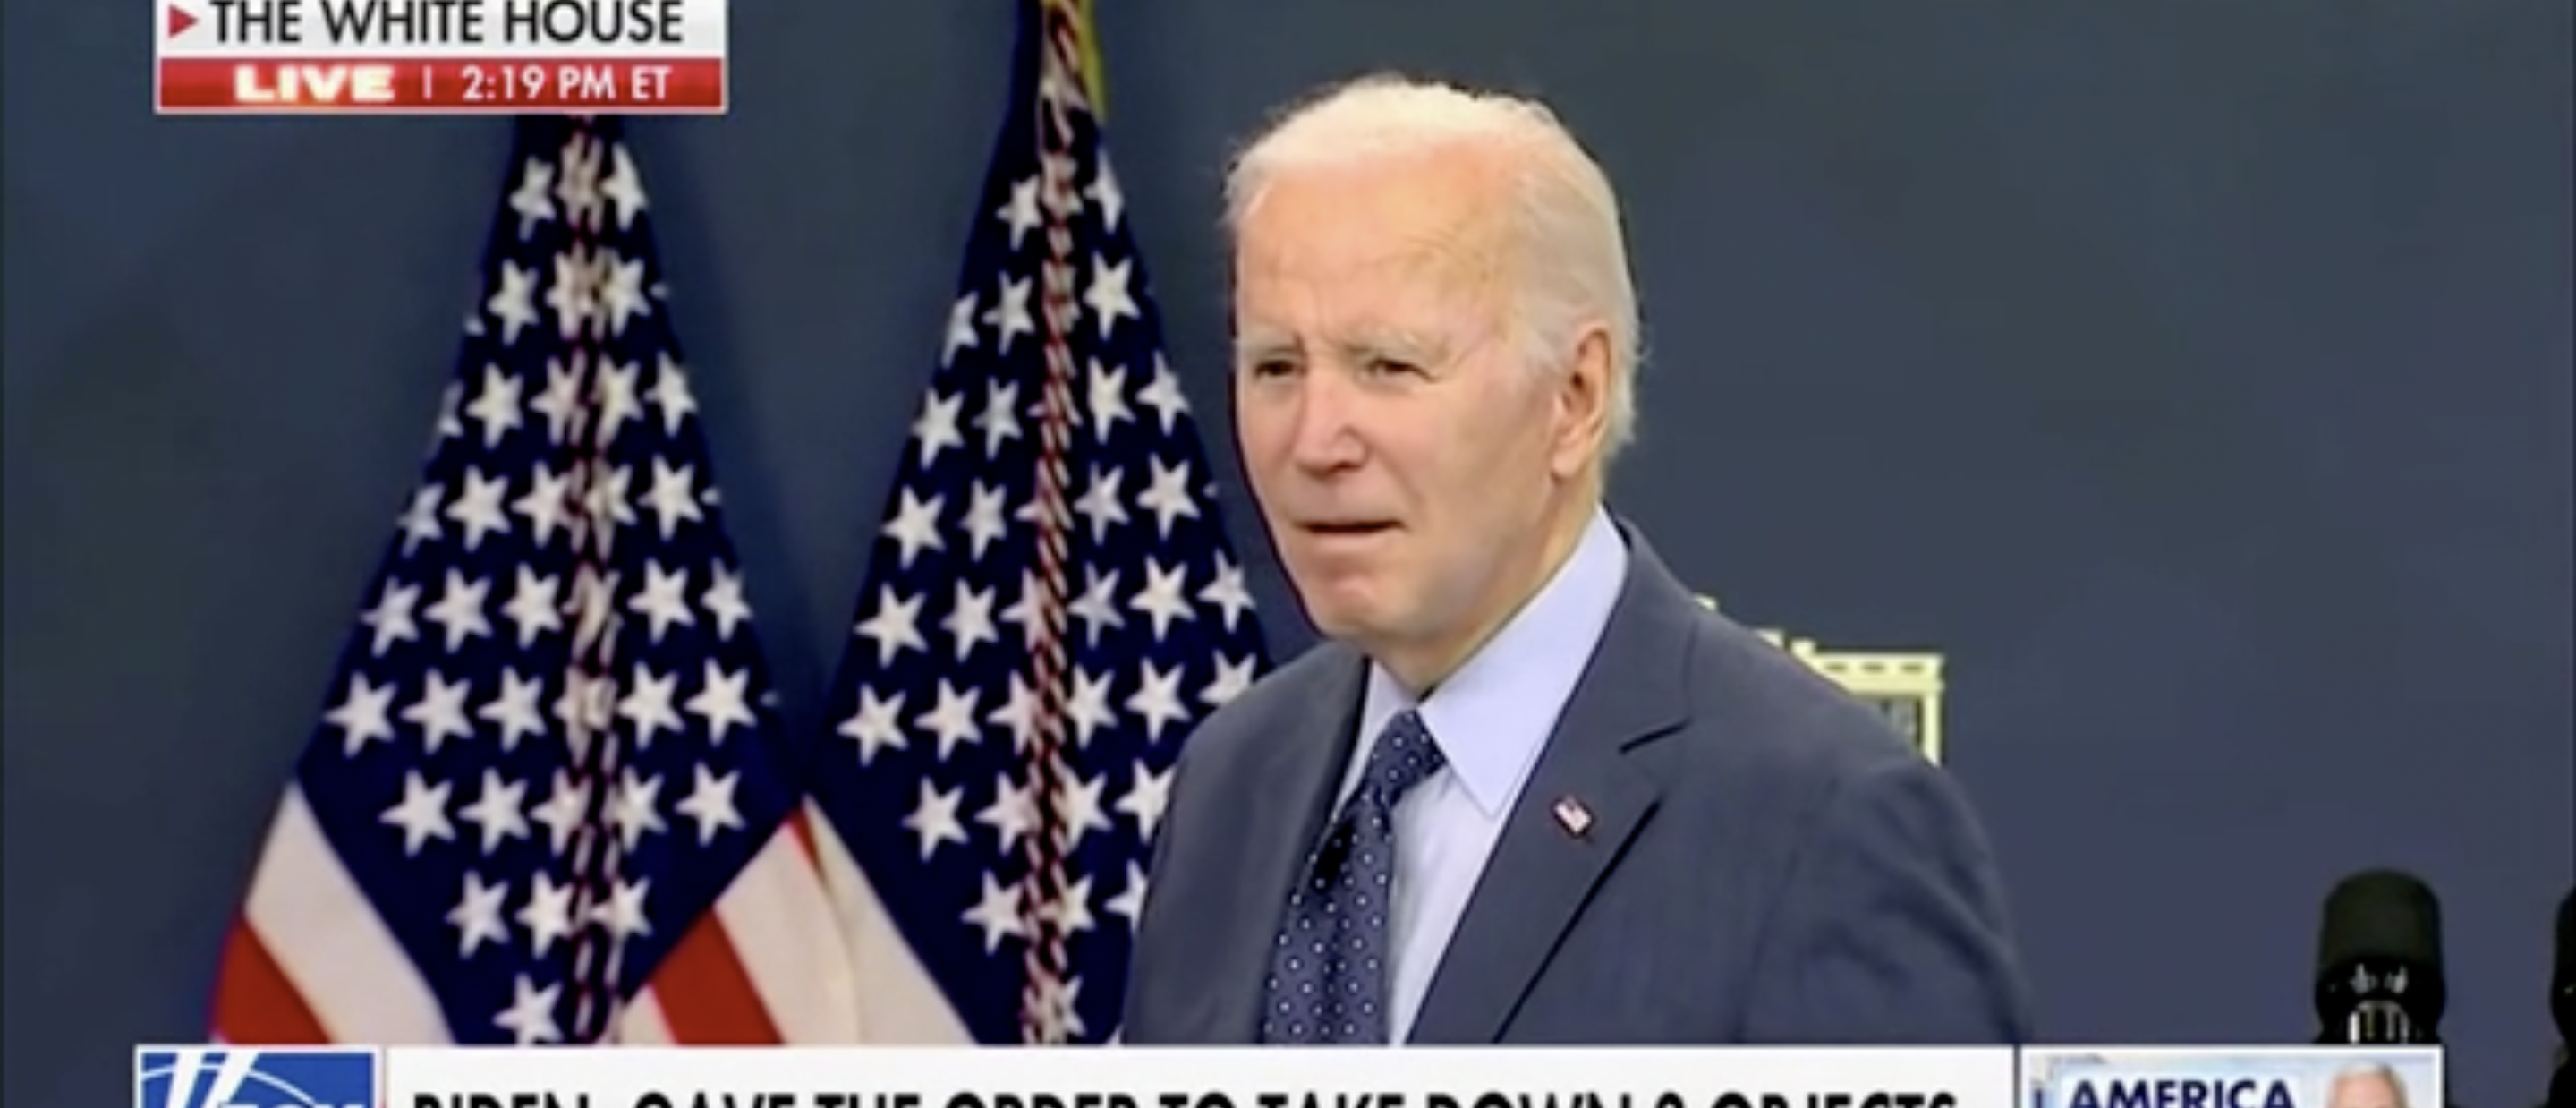 Biden Tries To Take Questions, Becomes Visibly Overwhelmed And Walks Away